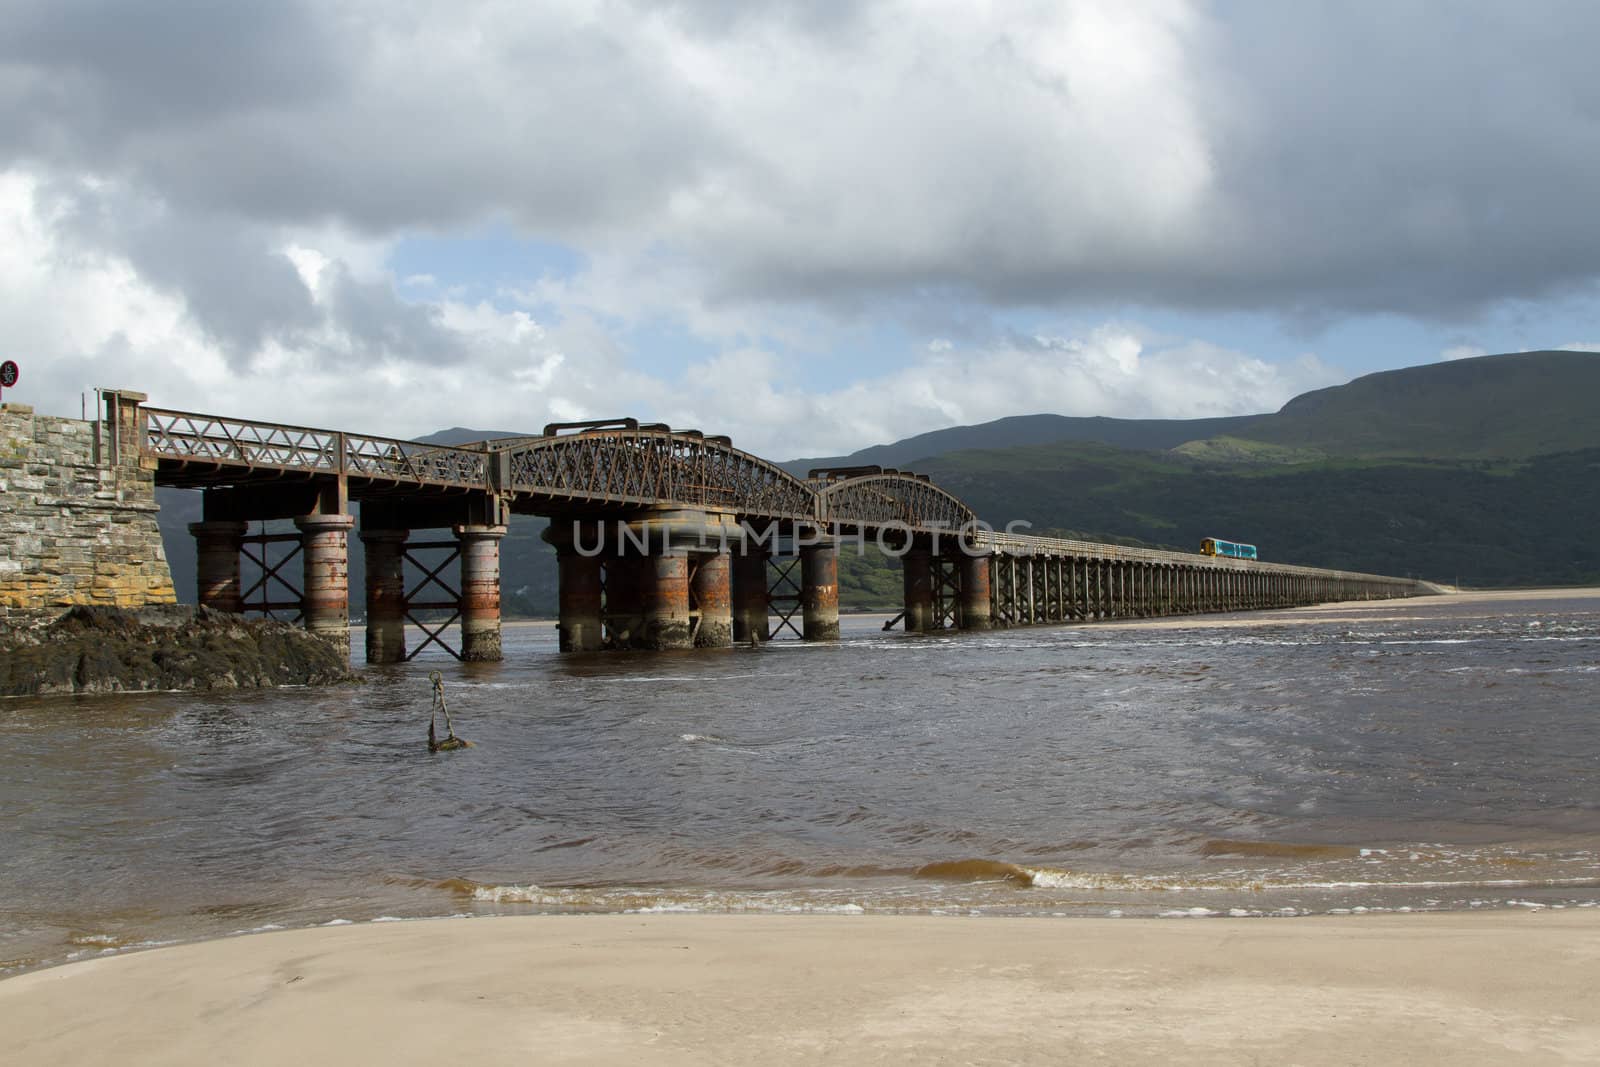 A railway bridge spans an estuary with the sea up on the sand and a train in the distance backed by dark mountains.